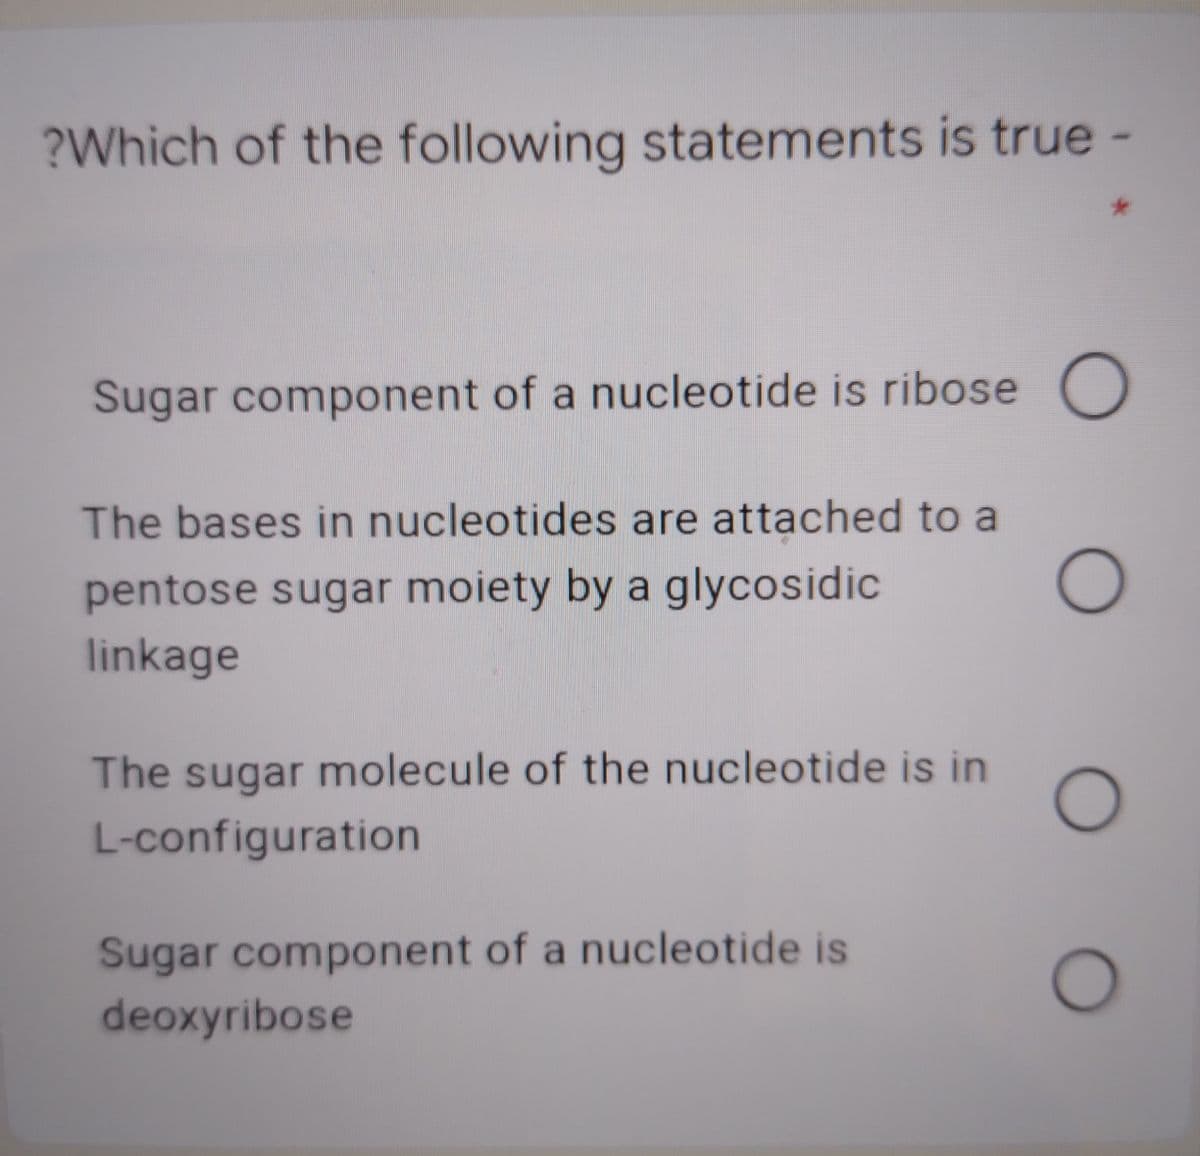 ?Which of the following statements is true -
Sugar component of a nucleotide is ribose O
The bases in nucleotides are attached to a
pentose sugar moiety by a glycosidic
linkage
The sugar molecule of the nucleotide is in
L-configuration
Sugar component of a nucleotide is
deoxyribose
